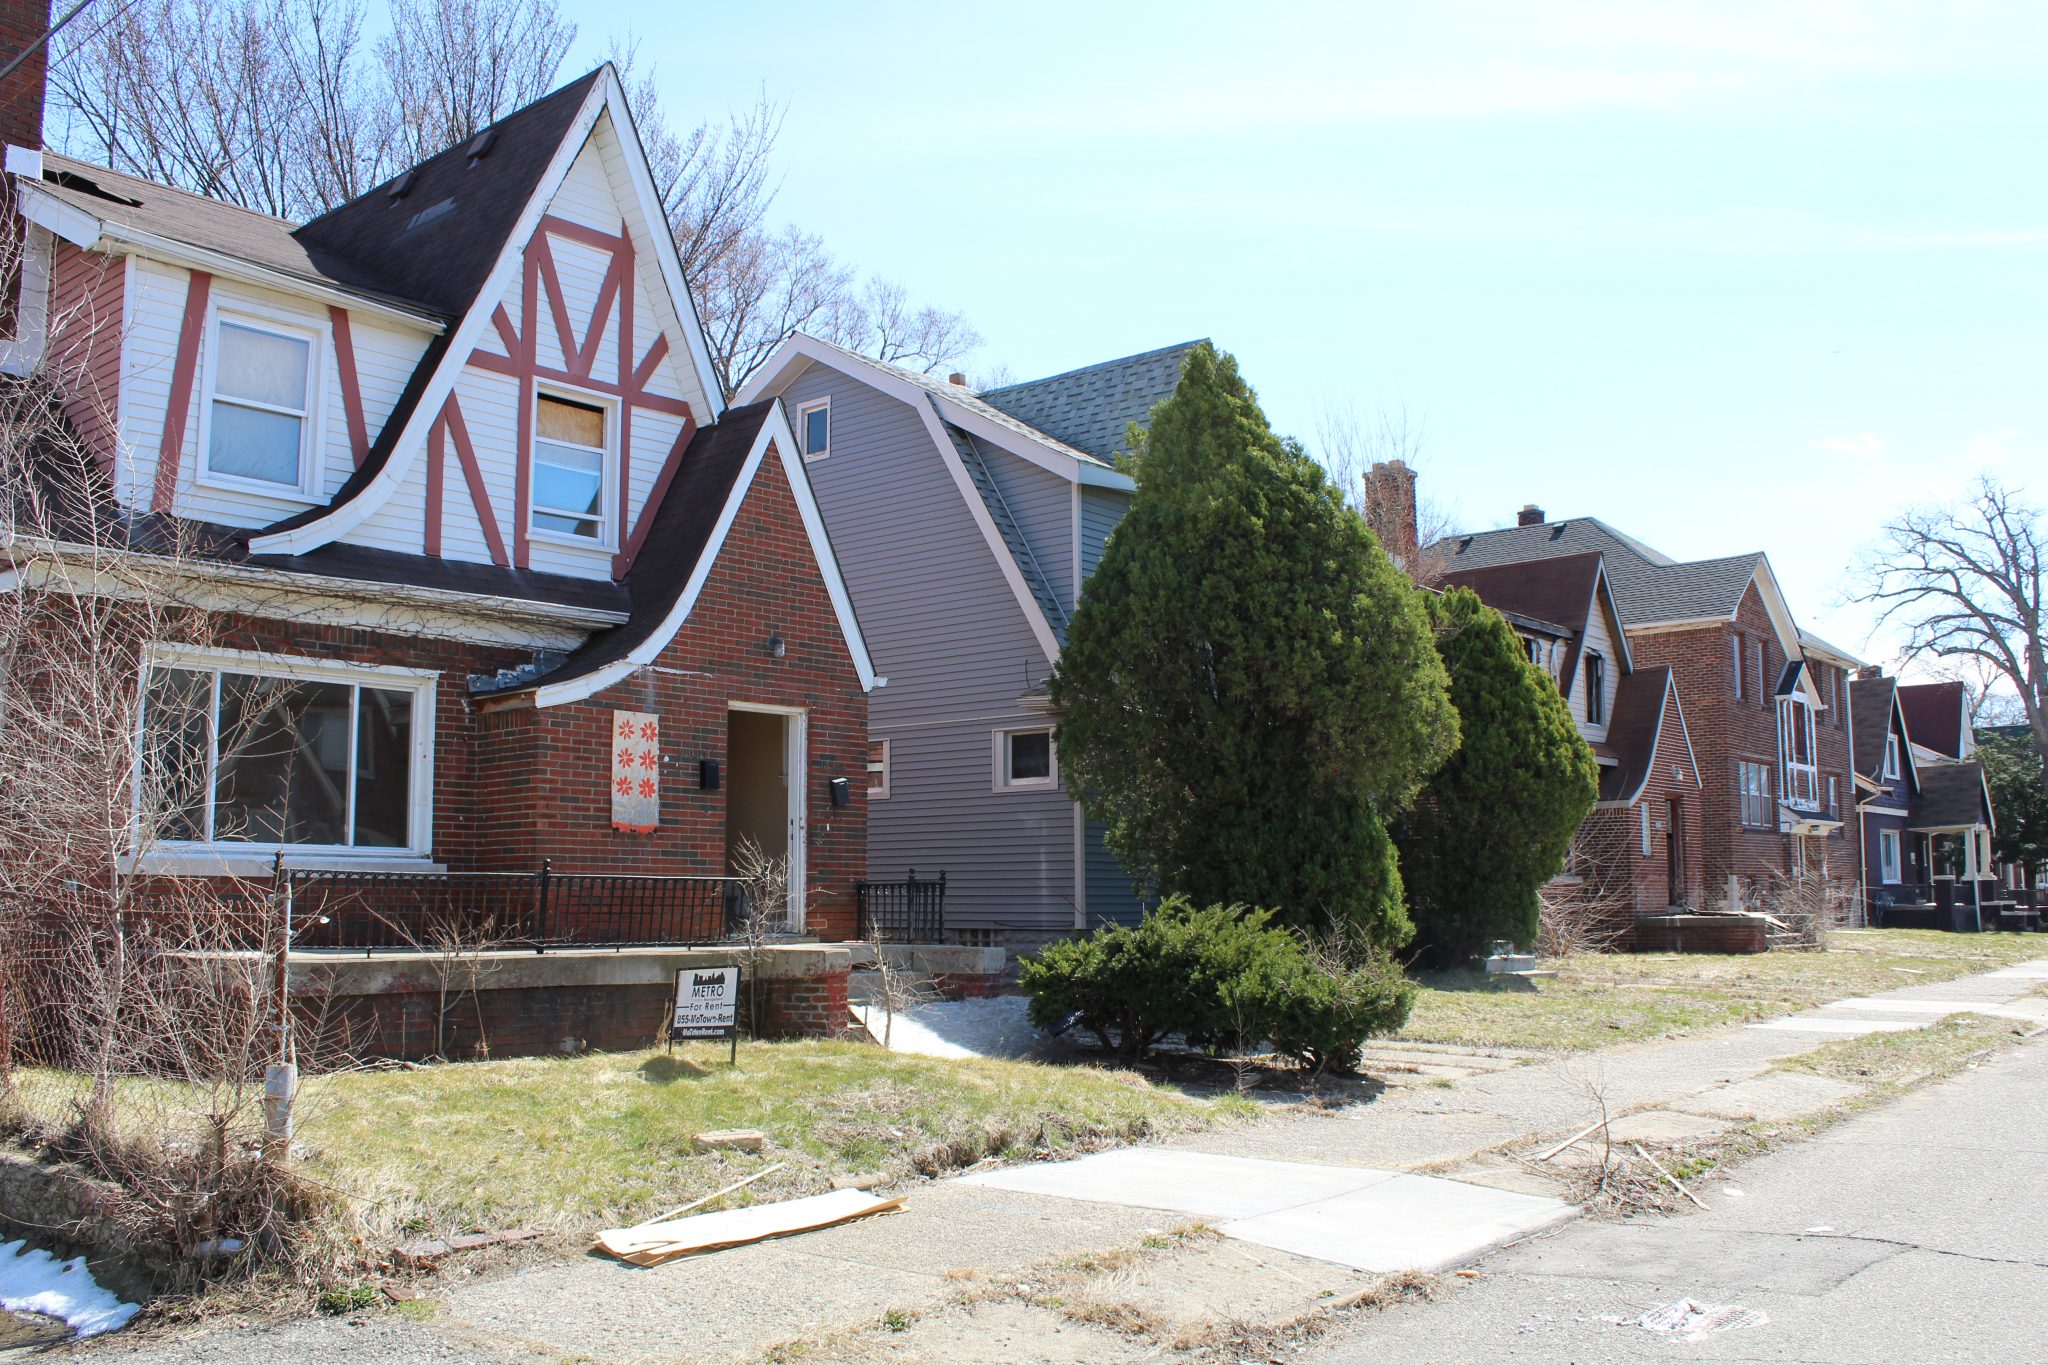 Detroit’s high property tax burden serves as a major obstacle towards residents’ upward economic mobility, however, there are interventions to address the city’s high tax rates.